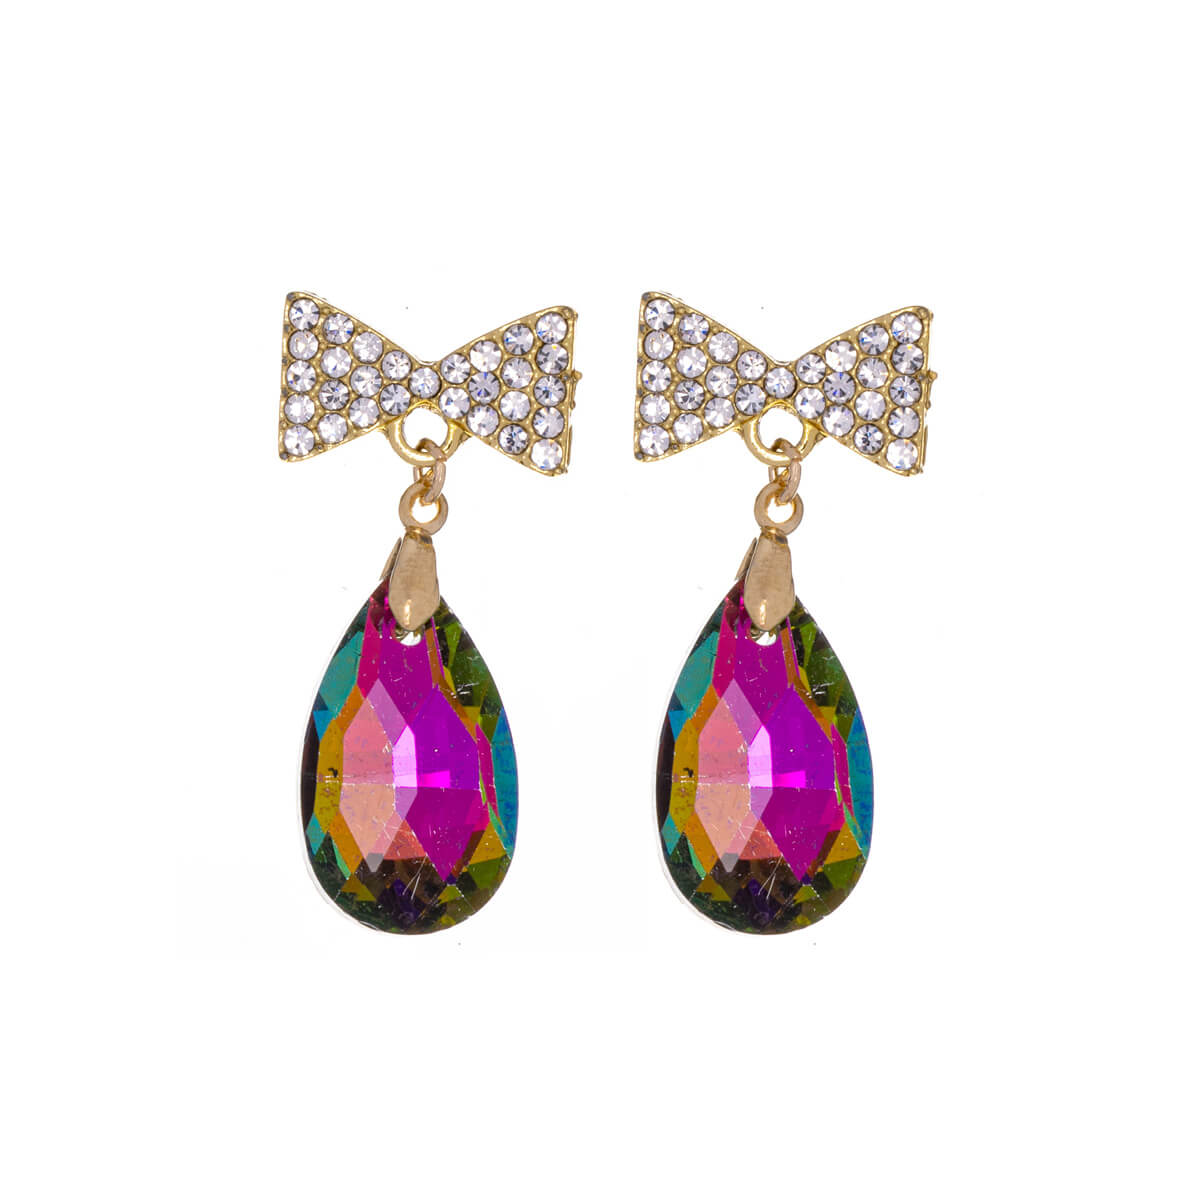 Sparkling bow earrings with dangling teardrops